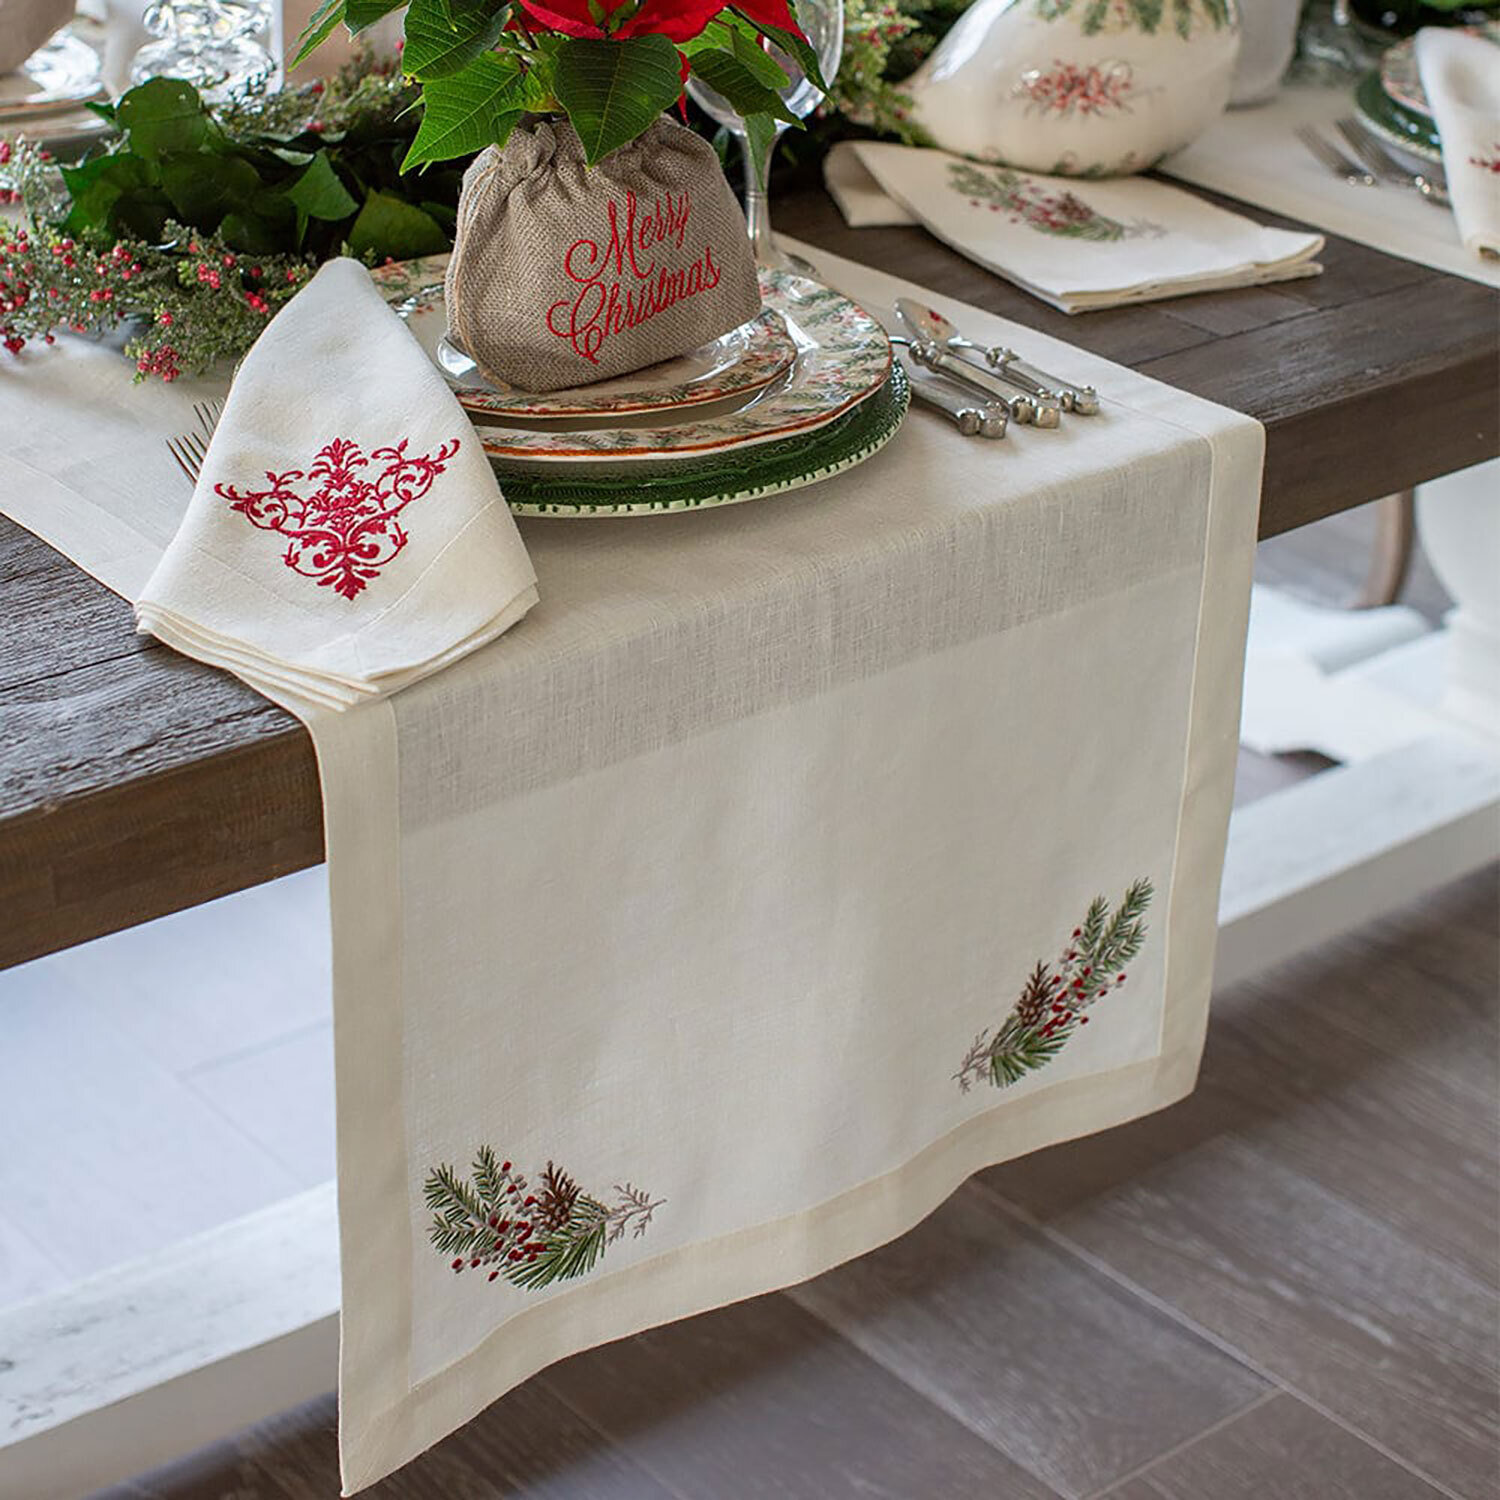 Crown Natale Table Runner 108 Inch Wide Cream R672